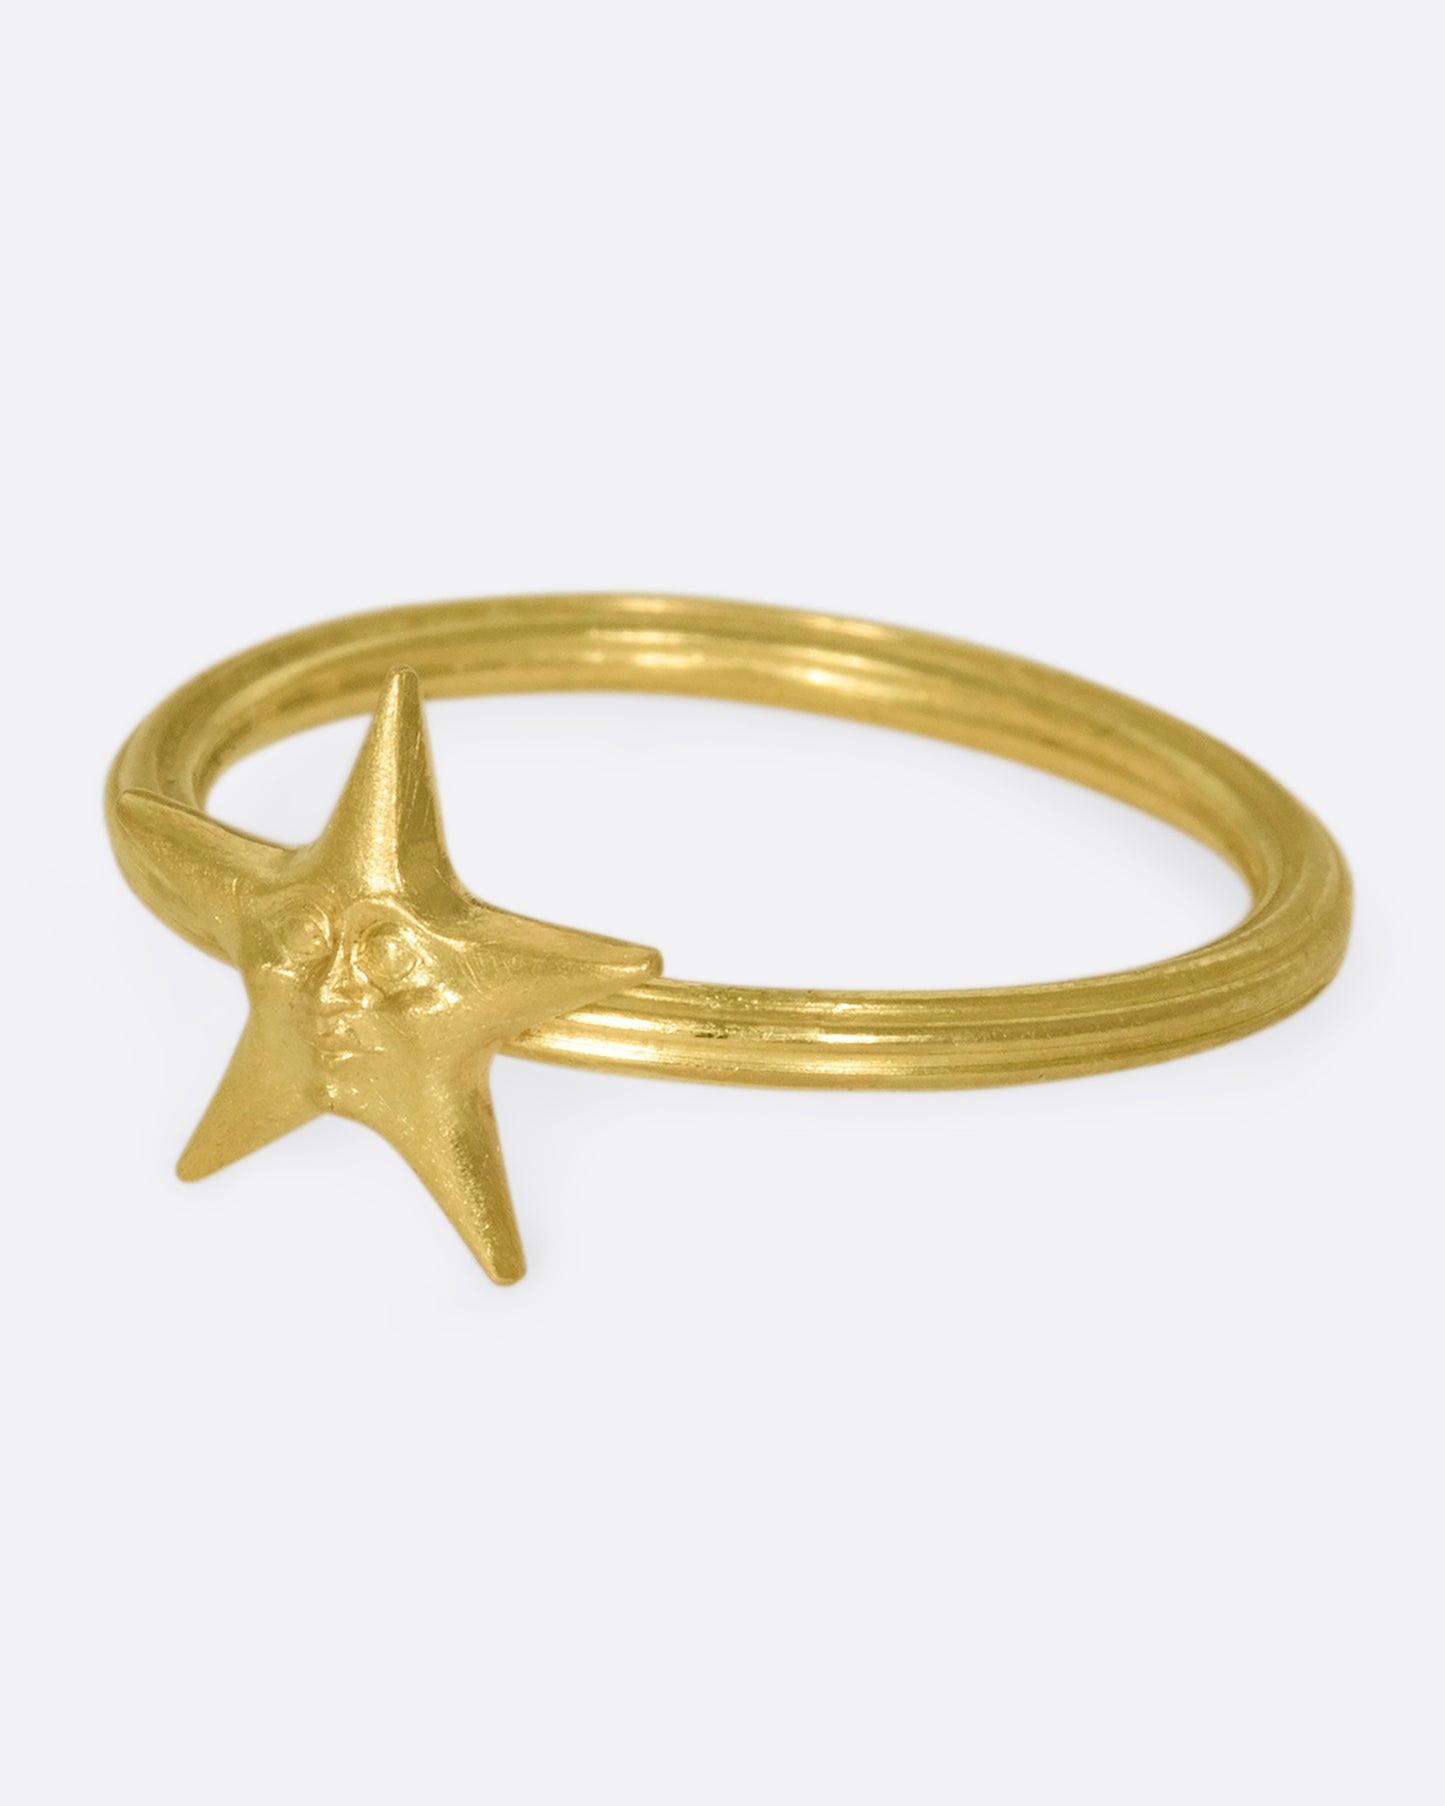 An 18k gold star ring with a sweet face emerging in the center.